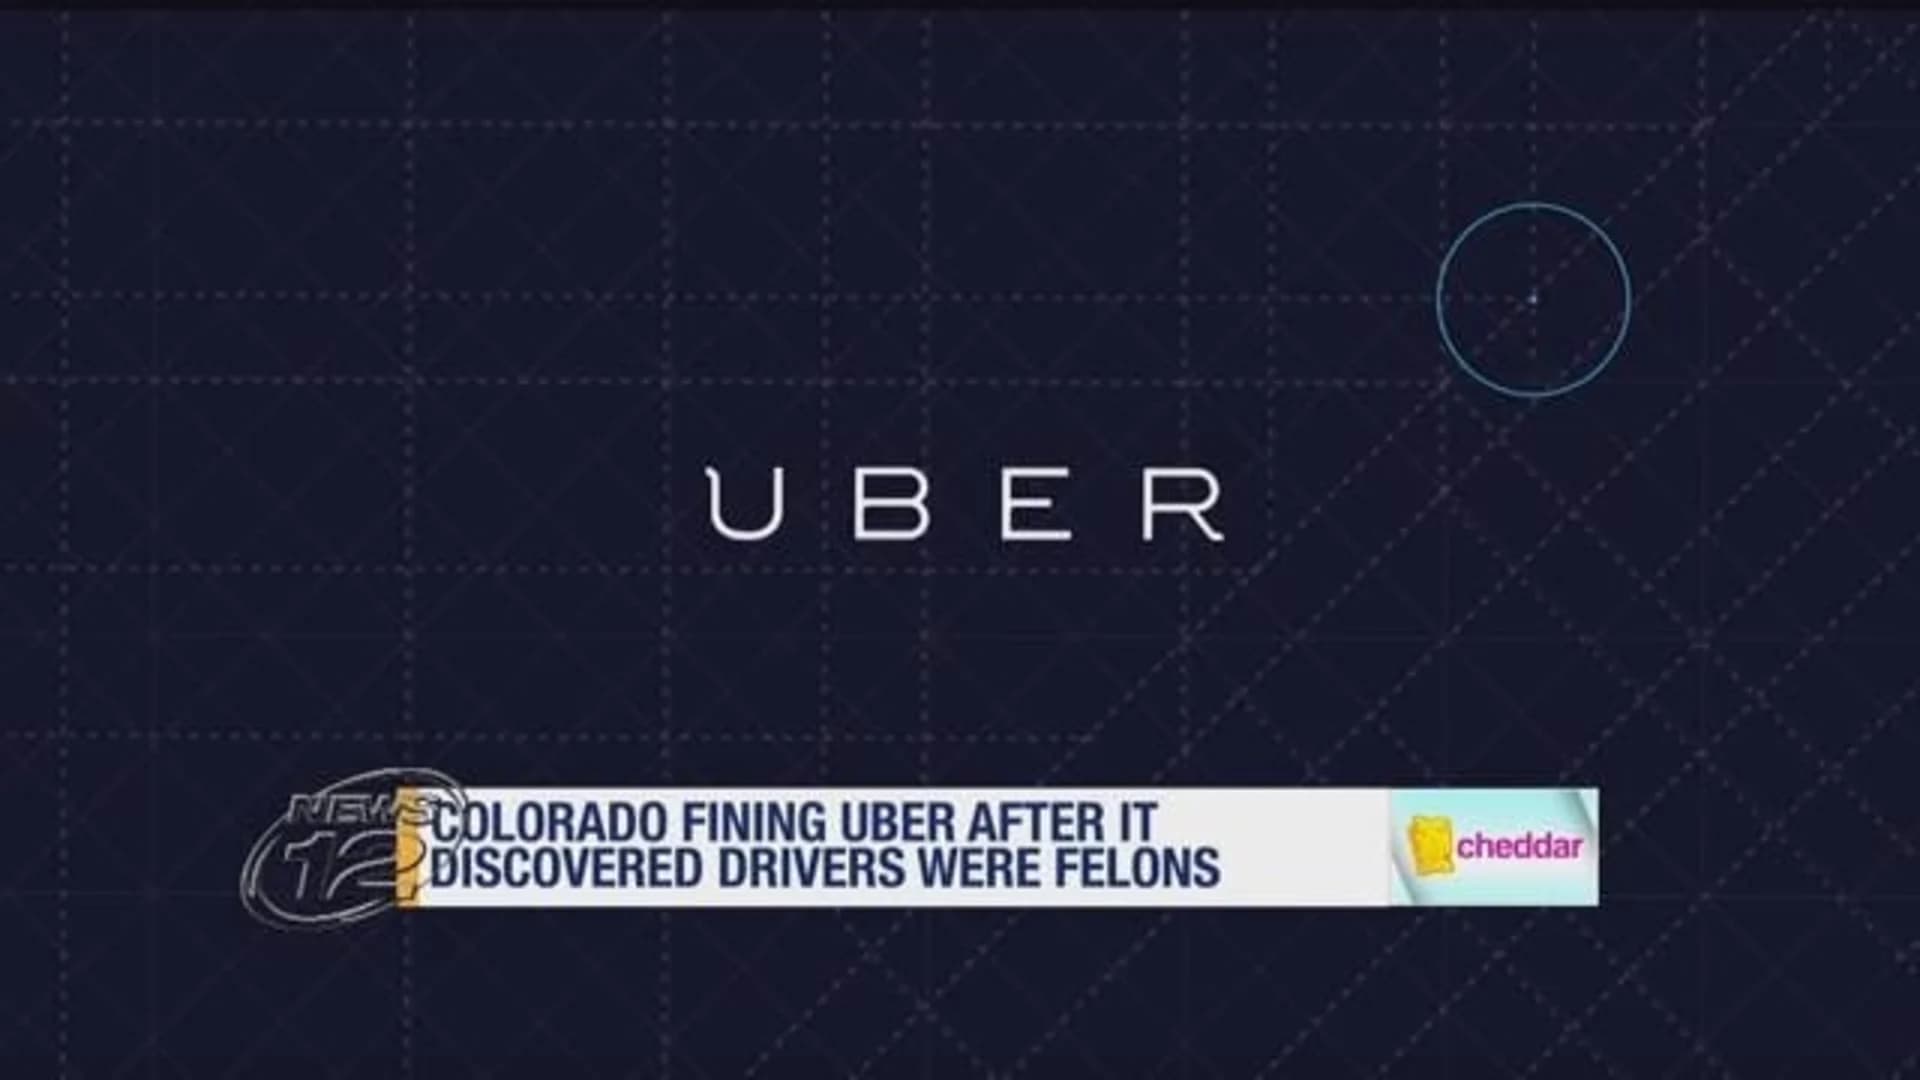 Cheddar Morning Business Update 11/21: Colorado sues Uber for $9M